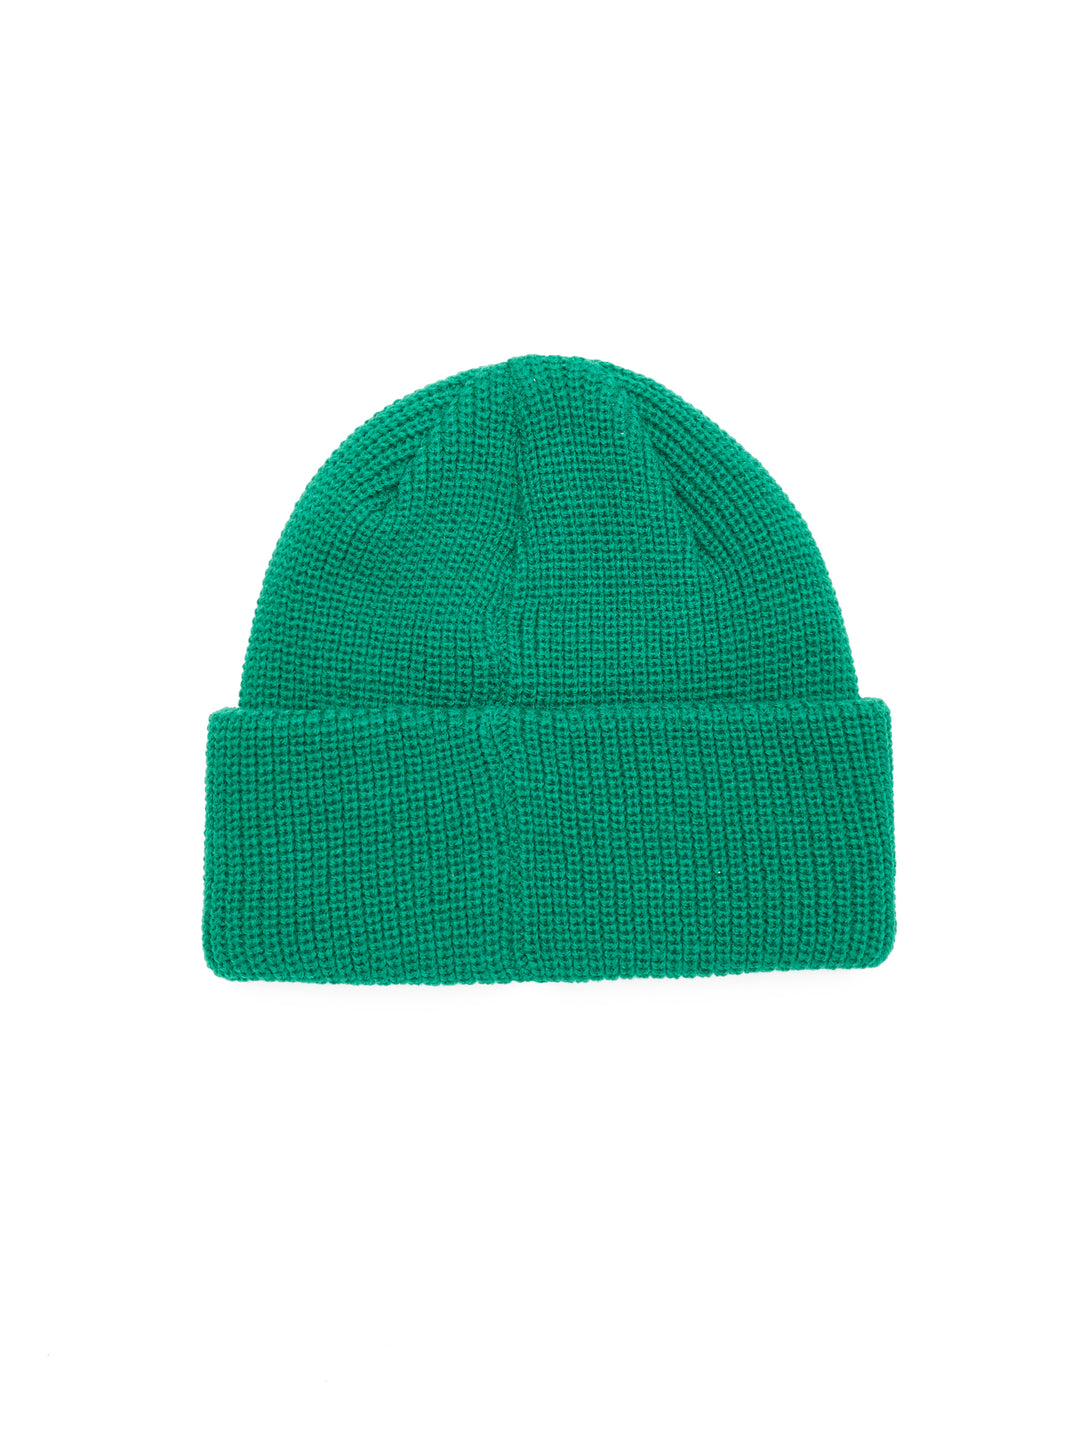 Jungle Beanie | Growth Green - Main Image Number 2 of 2